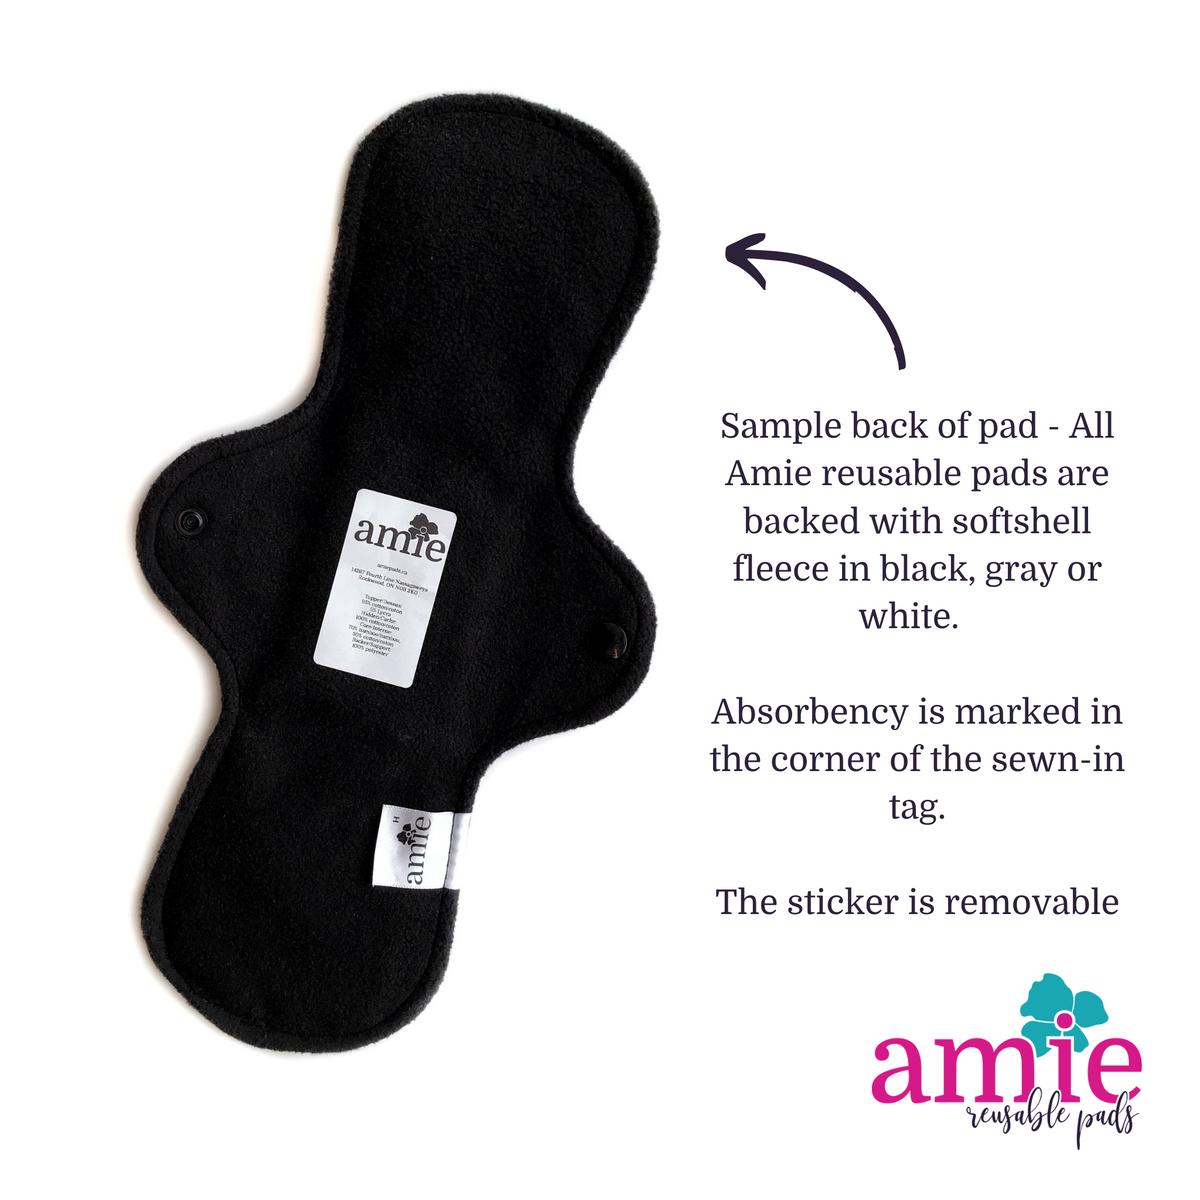 Sample back of an Amie reusable pad showing softshell fleece, legally compliant removable sticker and label with absorbency marked